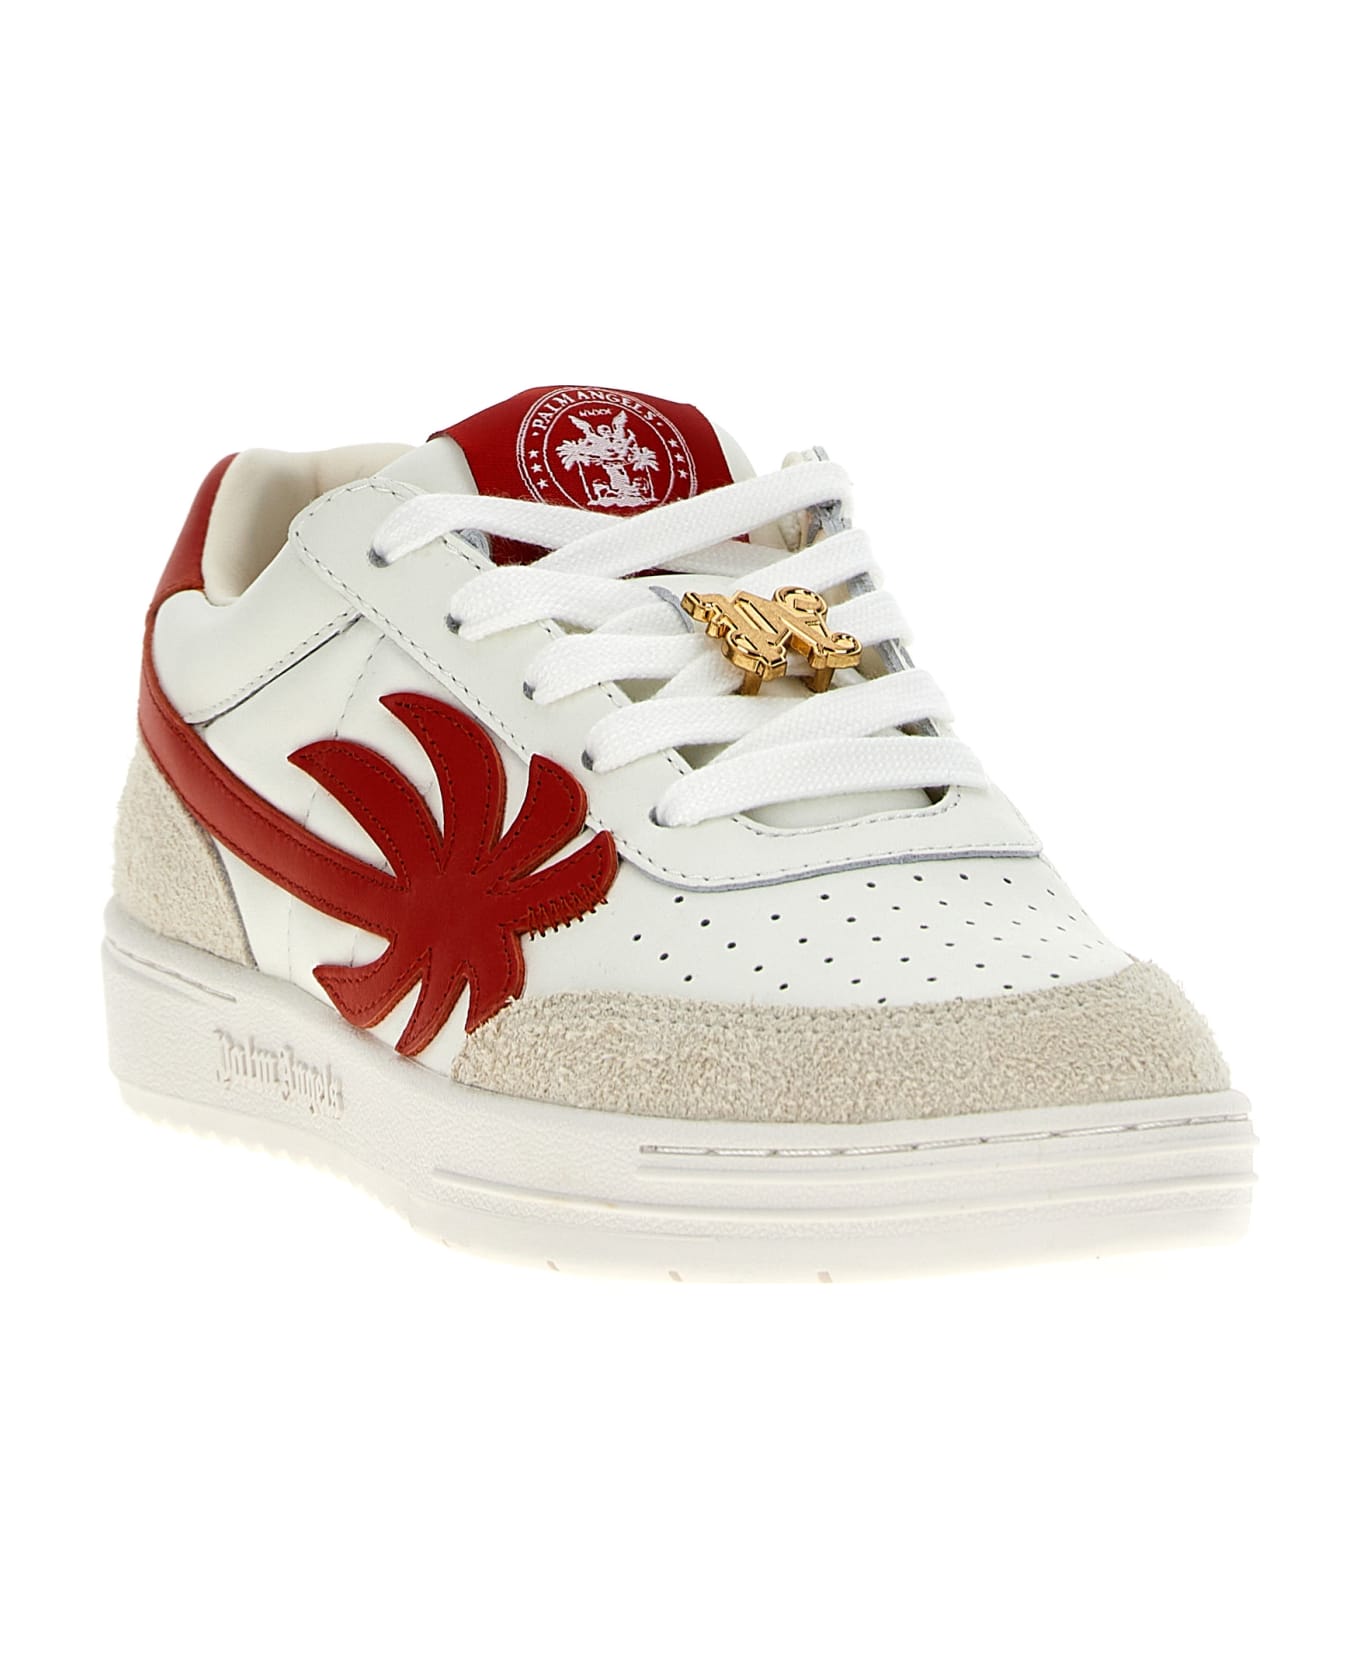 Palm Angels Palm Beach University Sneakers - Red